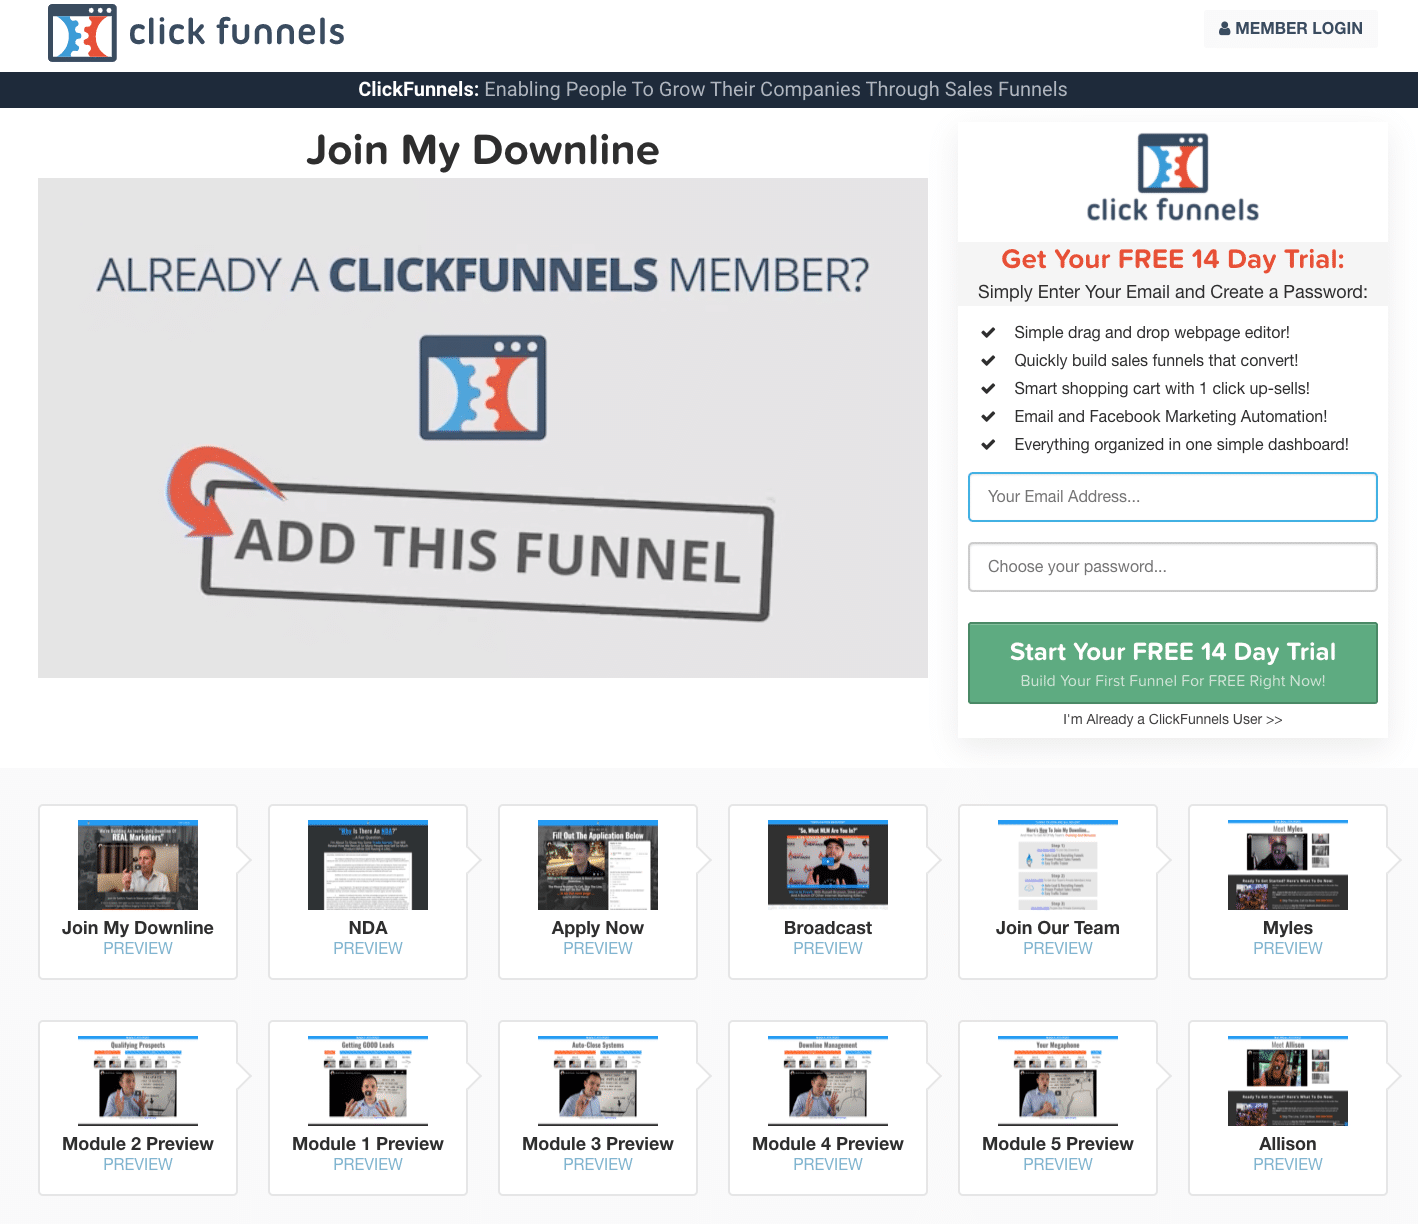 The What Network Marketing Companies Allow Clickfunnels Ideas